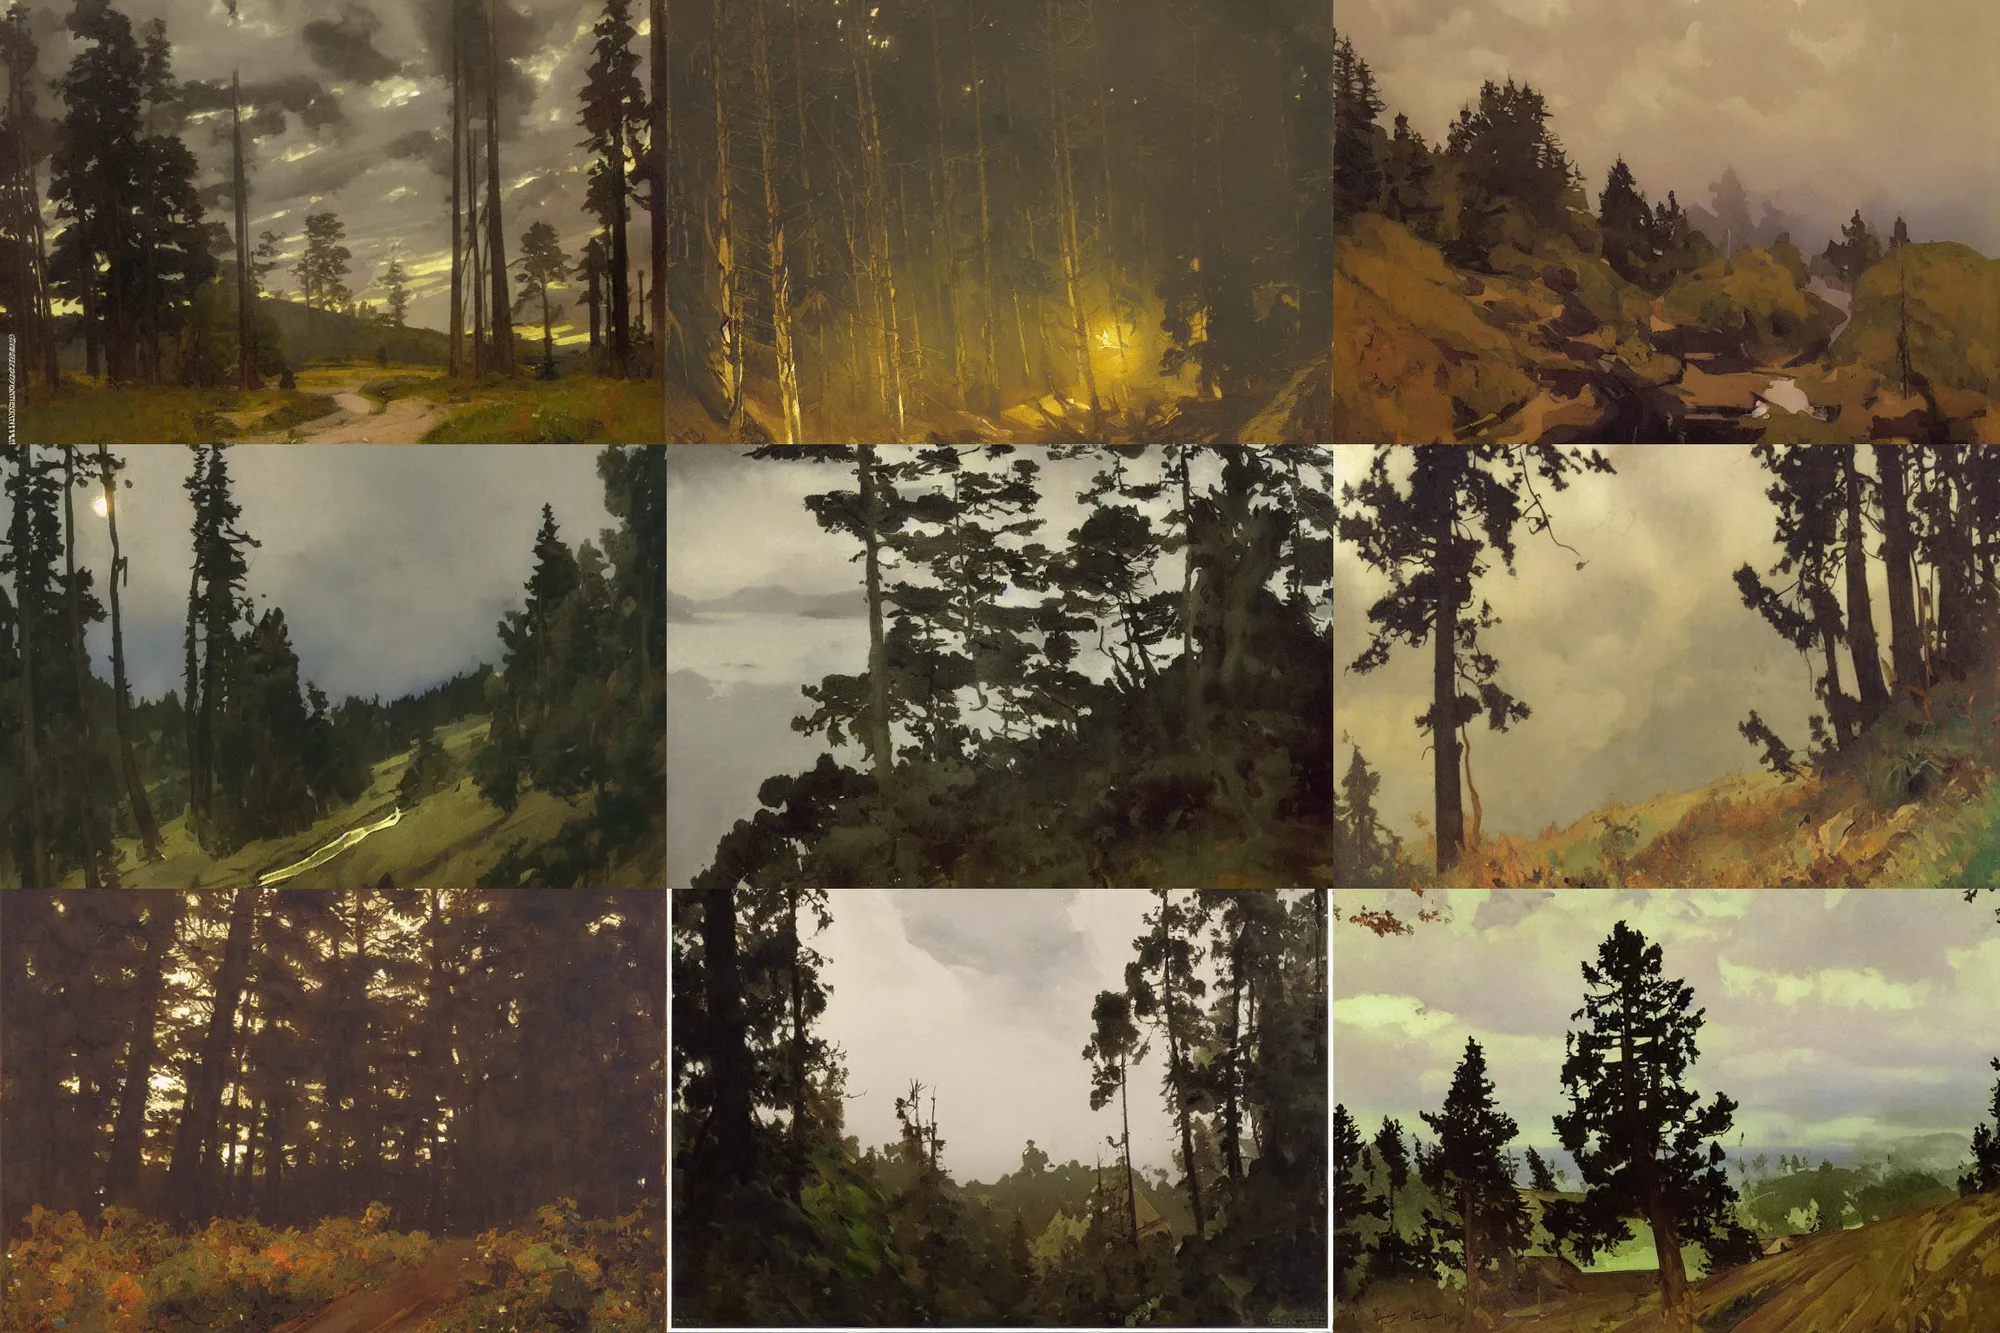 Prompt: painting by sargent leyendecker and gurney, vasnetsov, savrasov levitan polenov, middle ages, above the layered low clouds travel path road to sea bay view forest trees and rivers photo of praire overcast sharpen details darkest night black sky